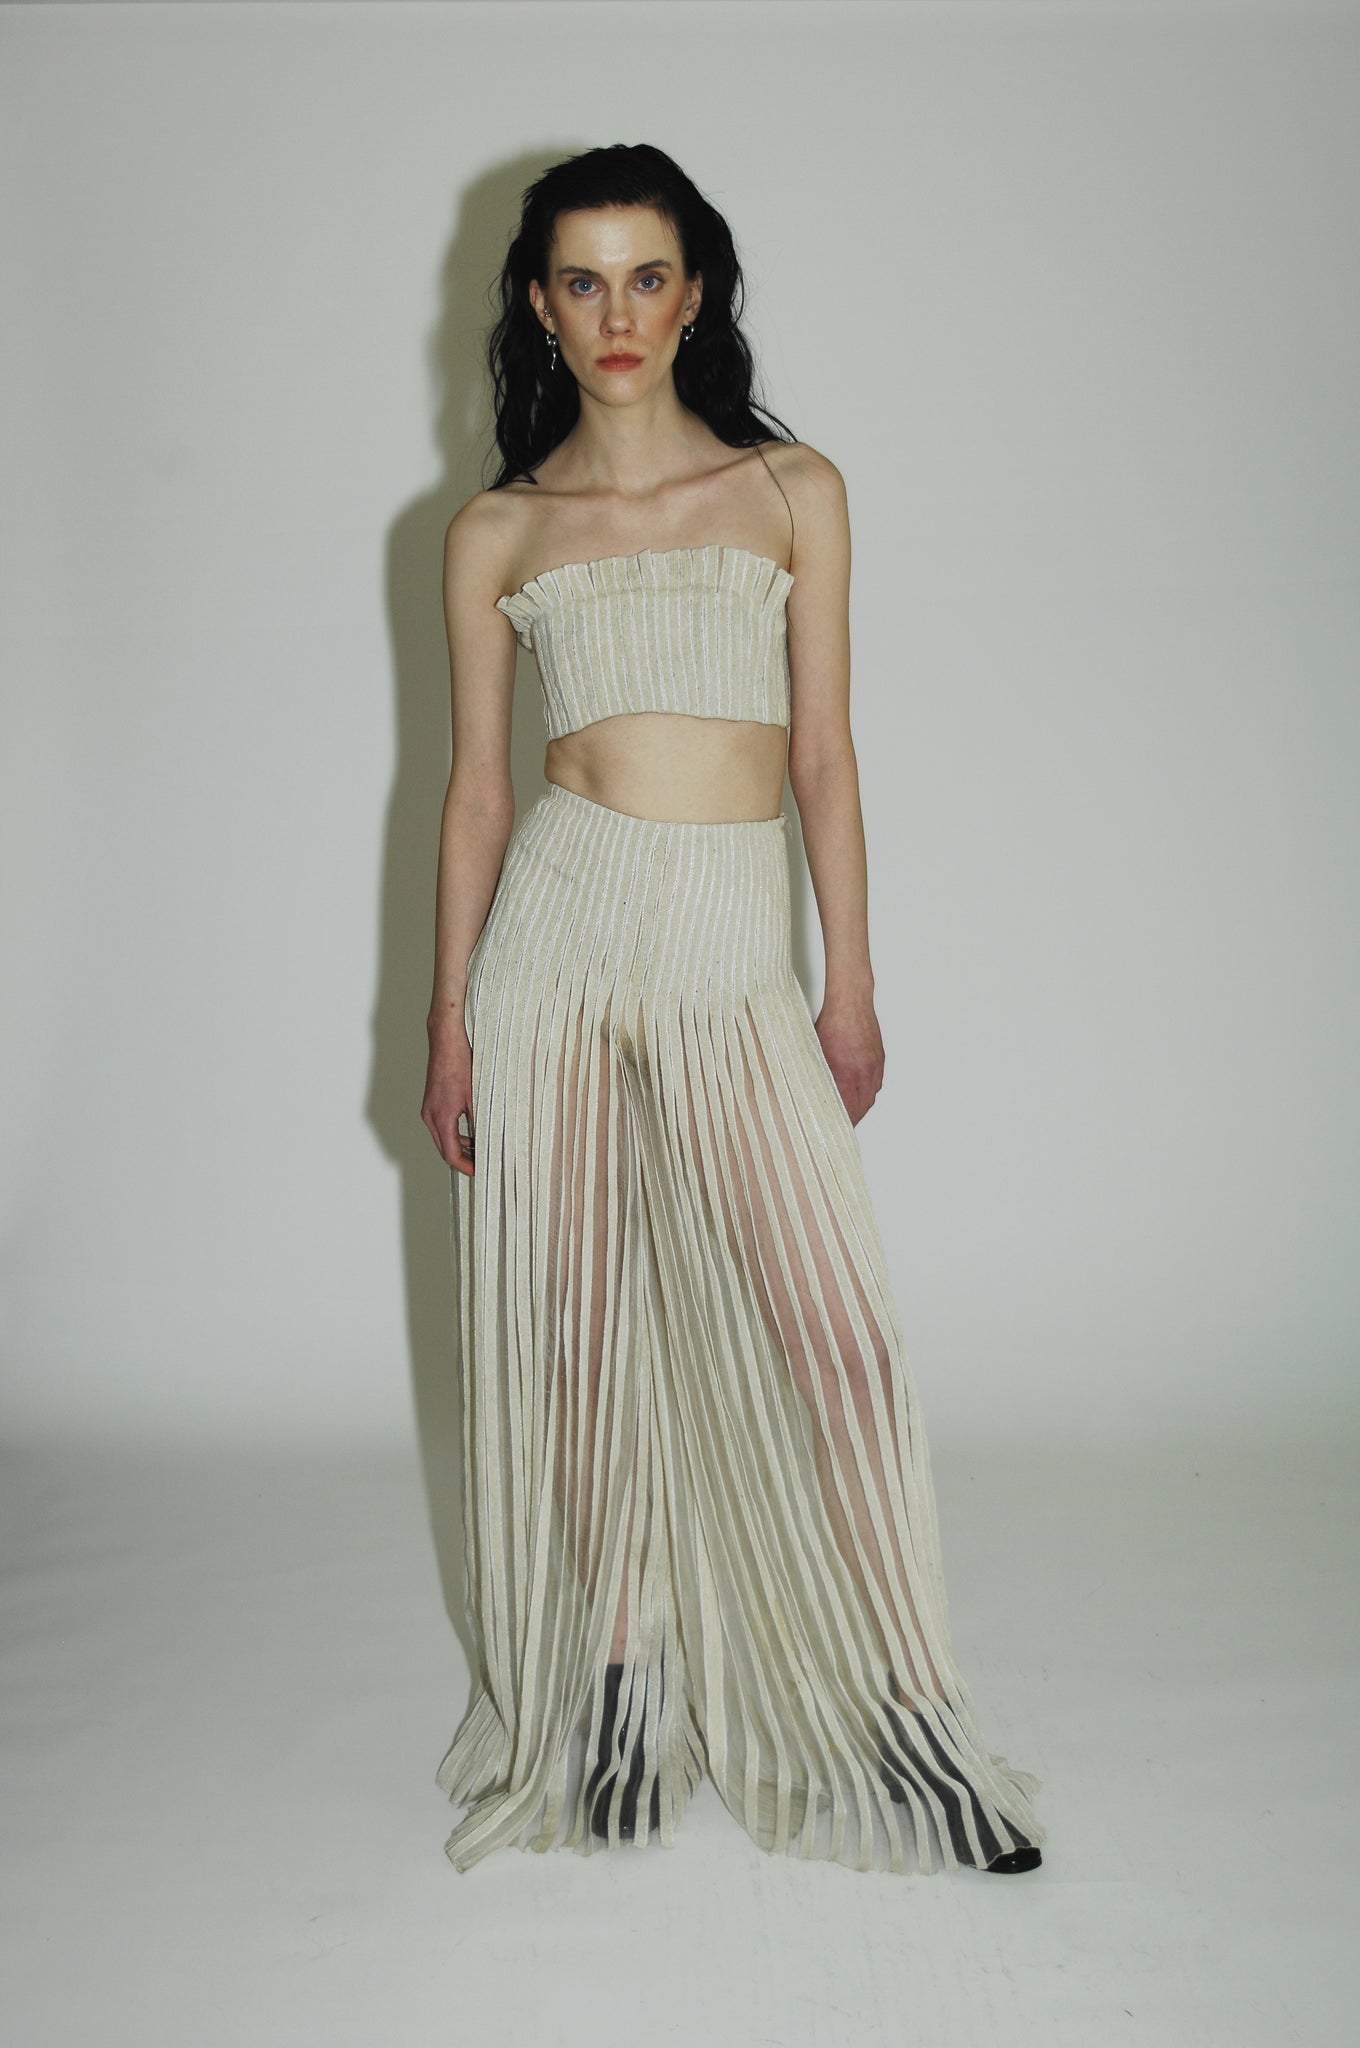 Handwoven silk with intricate ruffle detail, celebrating healing and imperfection